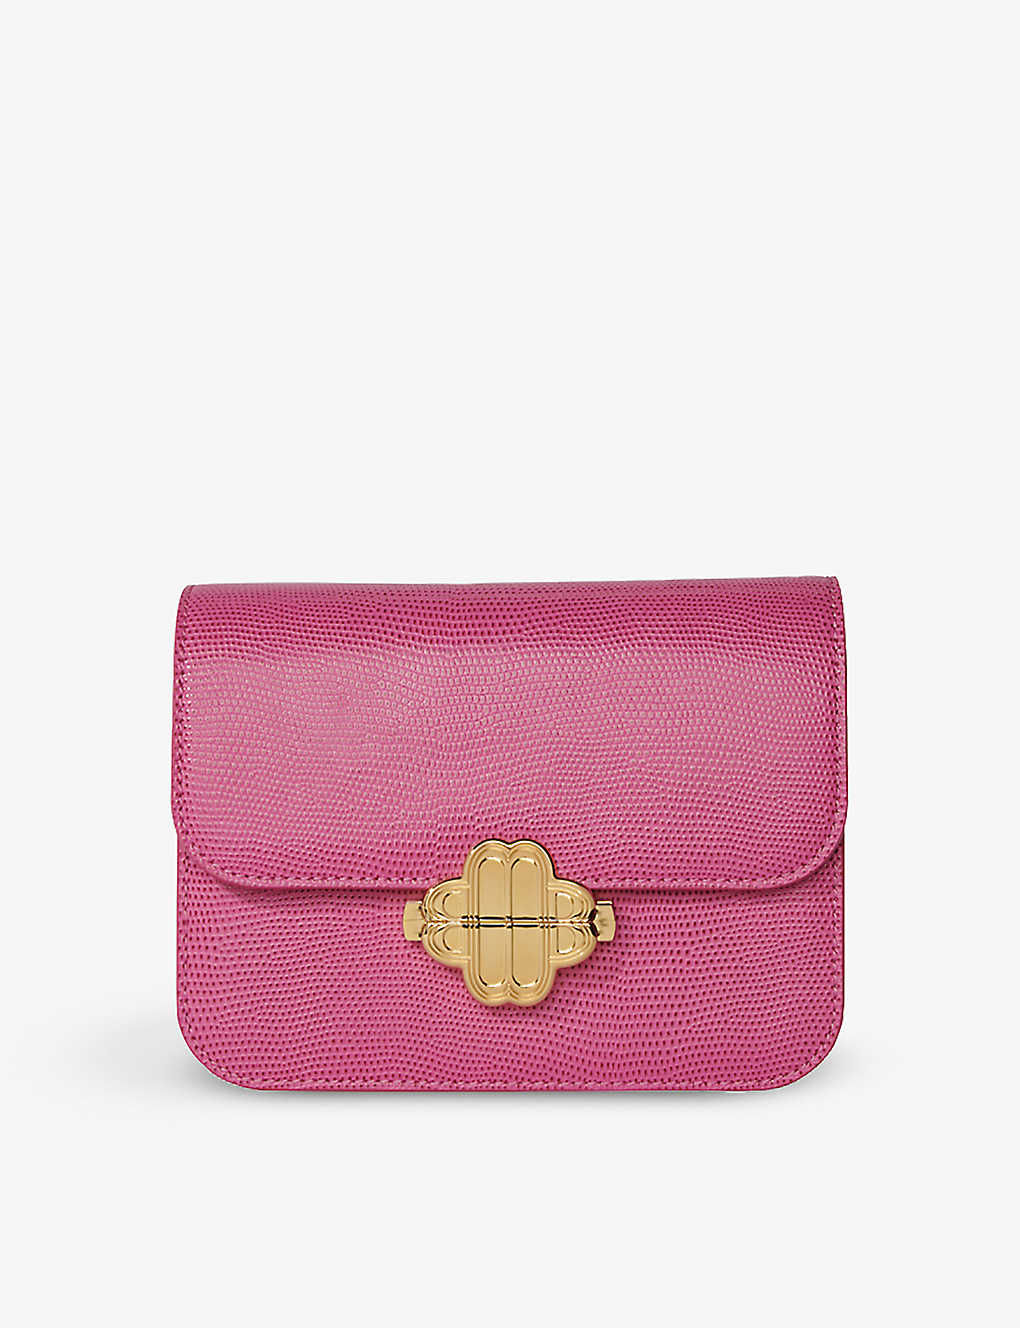 MAJE MAJE ROSES CLOVER-CLASP LIZARD-EMBOSSED LEATHER CROSS-BODY BAG,68879427